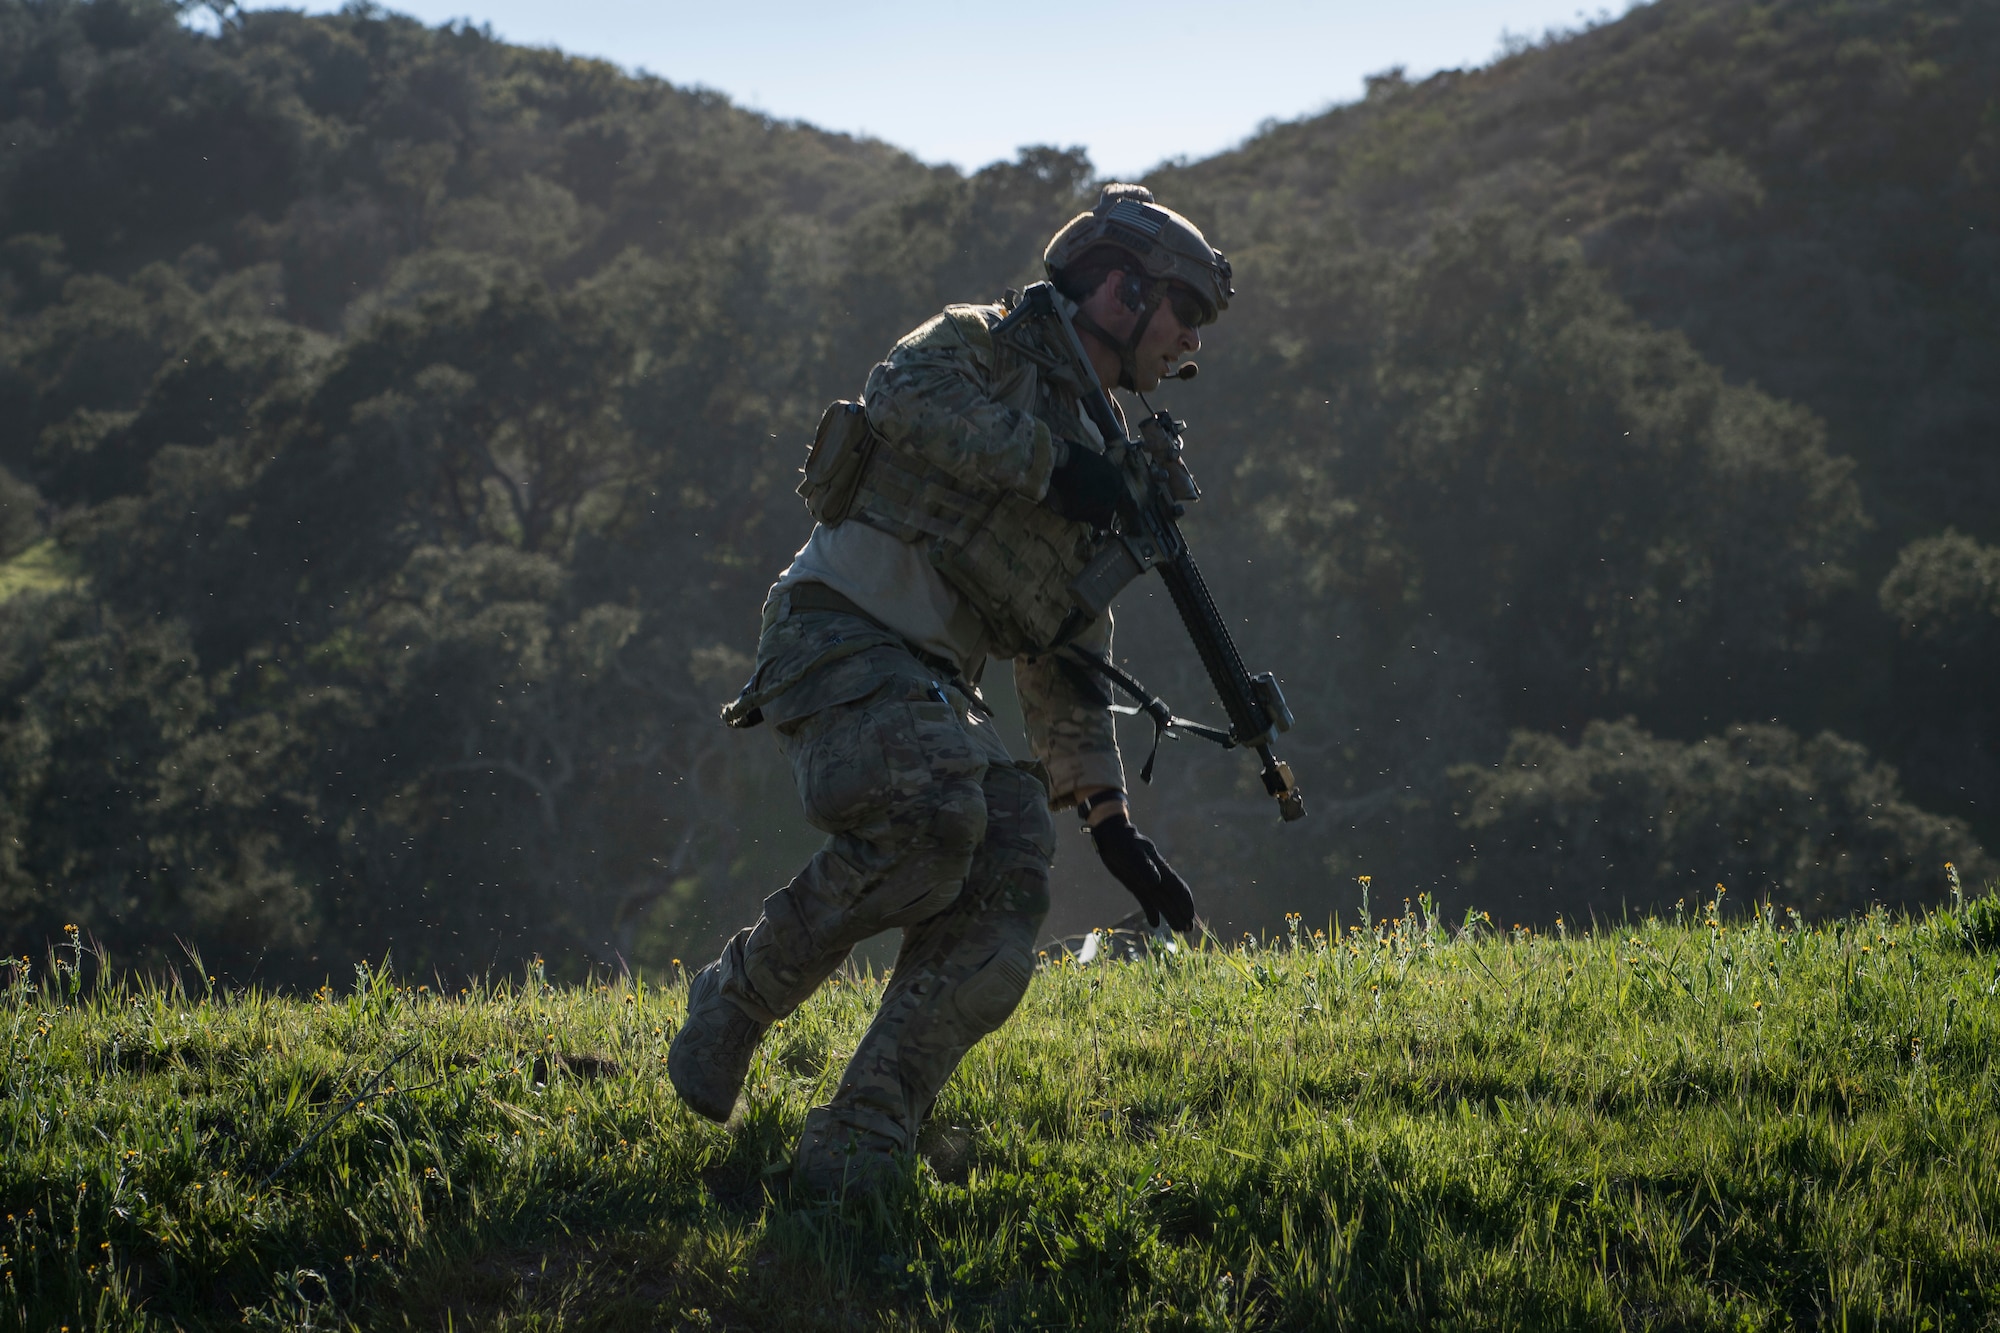 A pararescueman from the 58th Rescue Squadron, Nellis Air Force Base, Nev., runs for cover during Tiger Rescue IV, March 28, 2018, at Vandenberg Air Force Base, Calif. The four-day exercise challenged Airmen from multiple rescue squadrons to bring the capabilities of the personnel recovery triad together to successfully complete rescue missions and maintain proficiency. The three branches of the personnel recovery triad are the HC-130J Combat King II, HH-60G Pave Hawk and the guardian angel weapons system or pararescuemen. (U.S. Air Force photo by Senior Airman Janiqua P. Robinson)